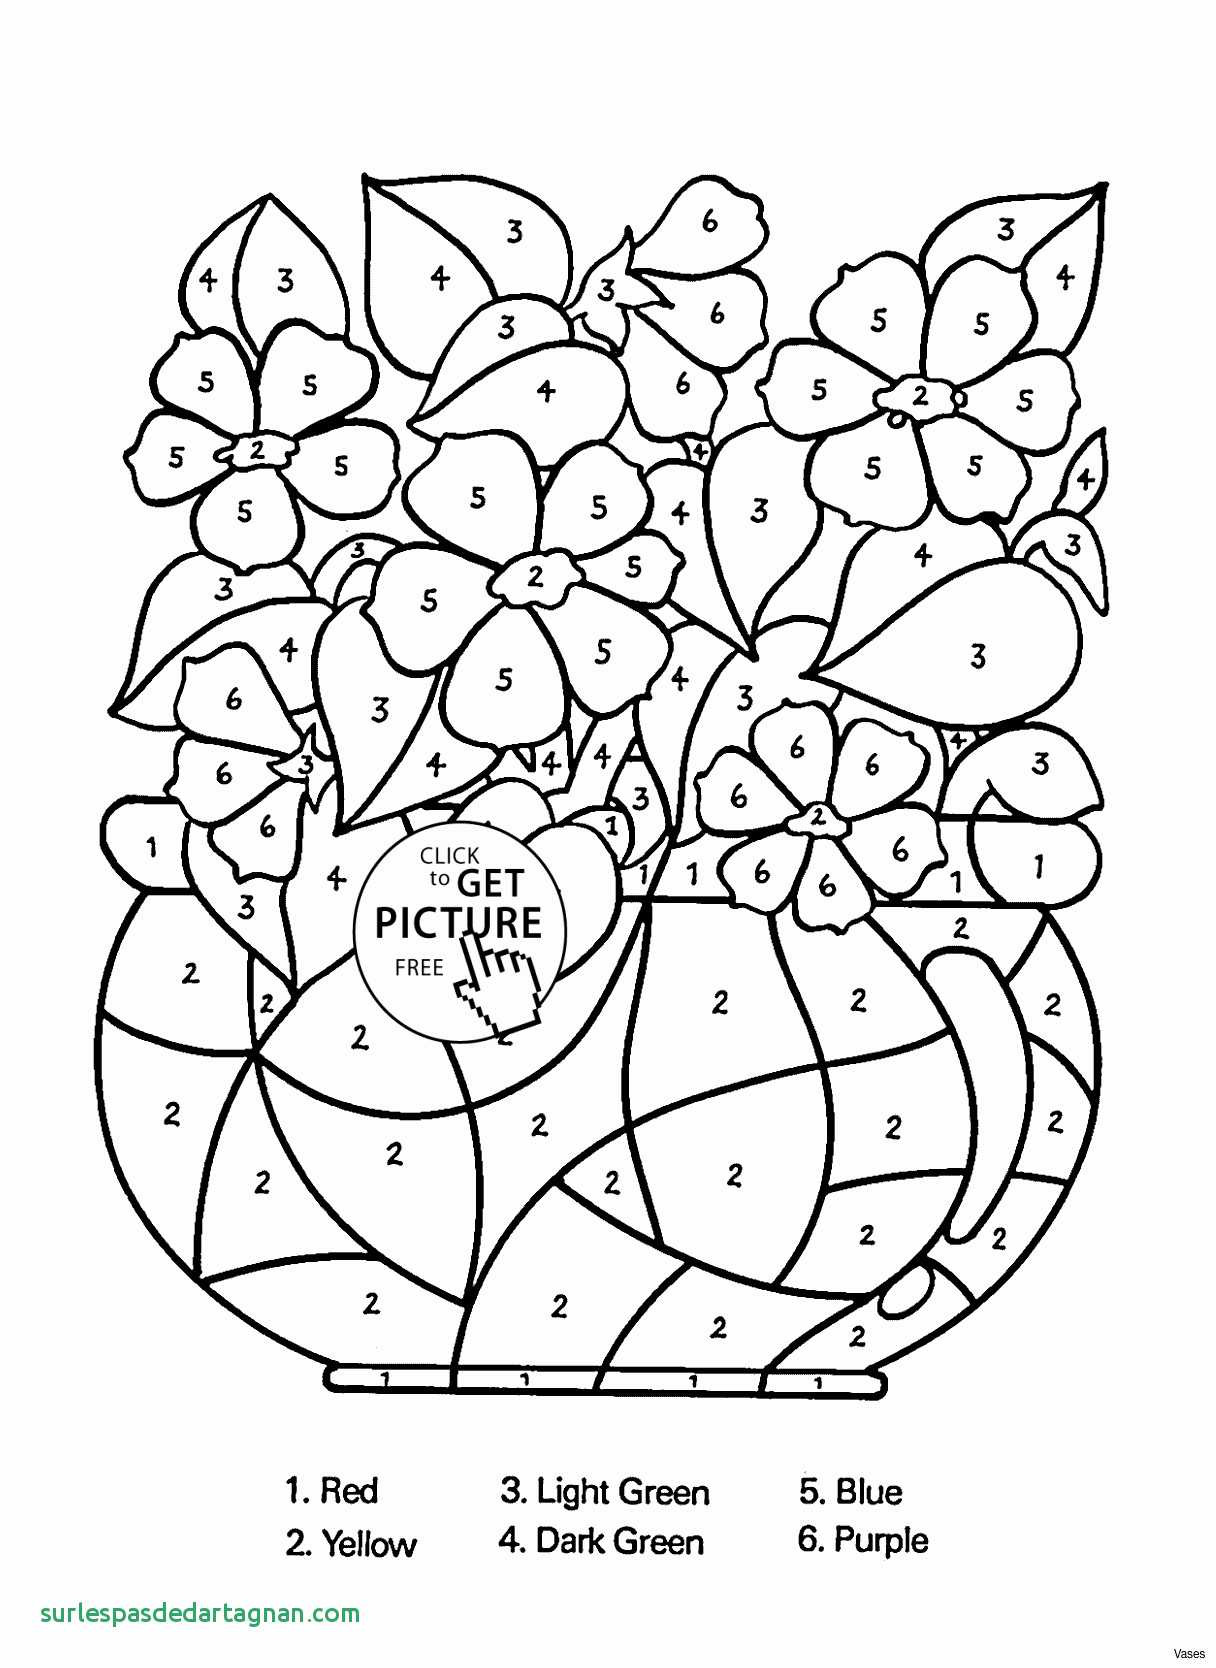 22 Wonderful Flower Vase Painting 2024 free download flower vase painting of marker coloring page vases flower vase coloring page pages flowers for marker coloring page vases flower vase coloring page pages flowers in a top i 0d dot